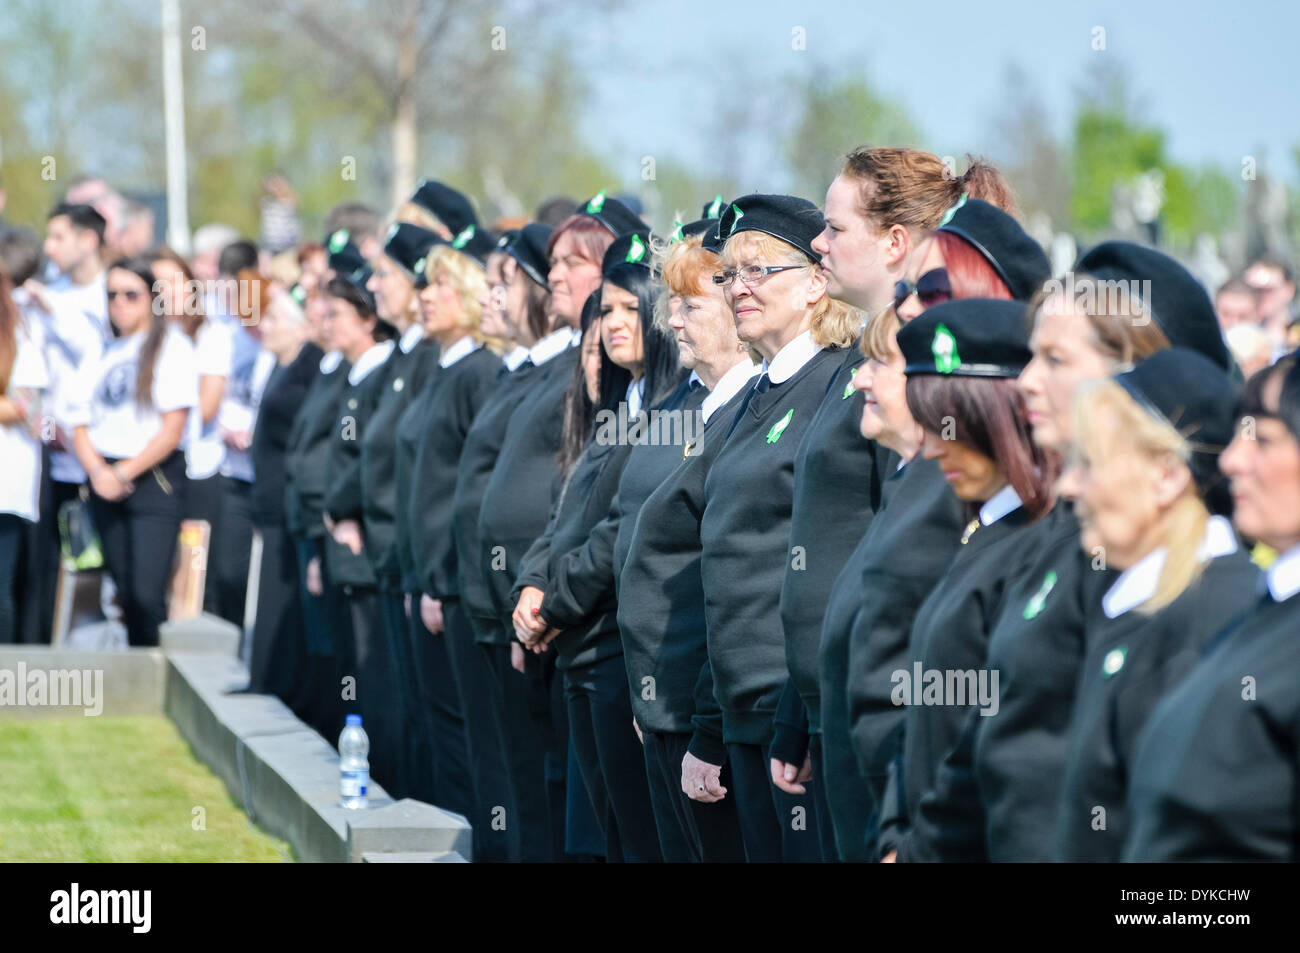 Women from the Cumann na mBan wear historical paramilitary uniforms to commemorate the 1916 Irish Easter Rising, Belfast, Northern Ireland. Stock Photo